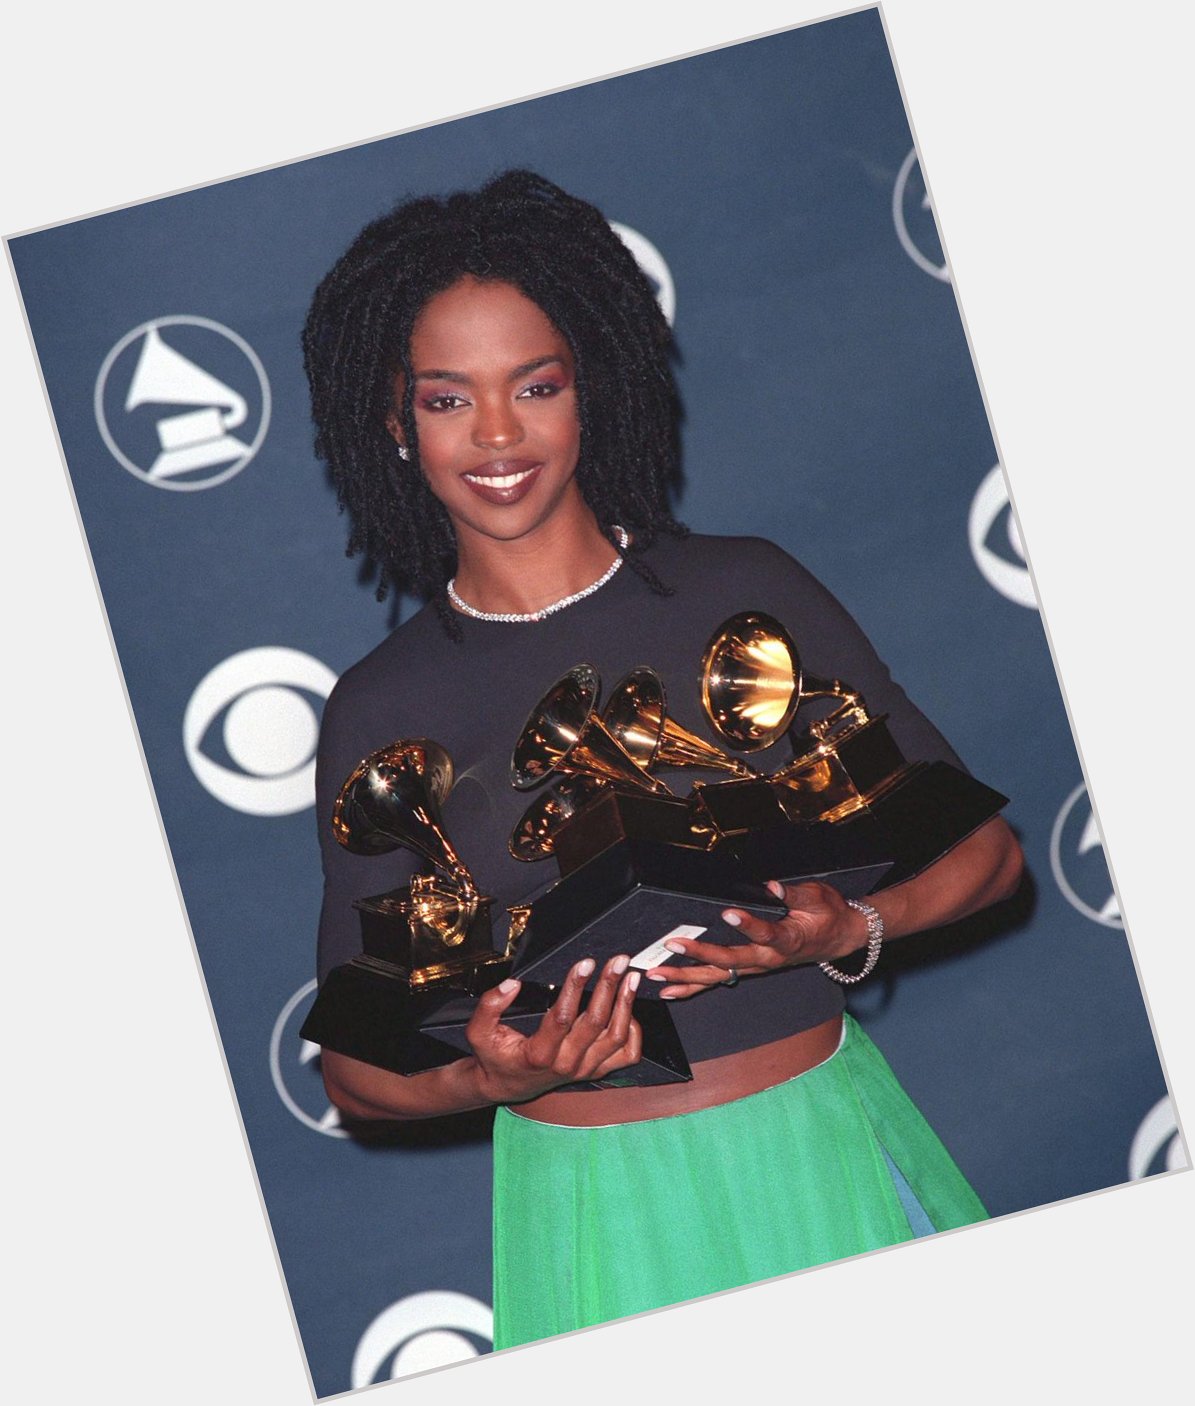 Happy Birthday to Lauryn Hill who, in 1999, set the record for most Grammys won by a woman in one night. 